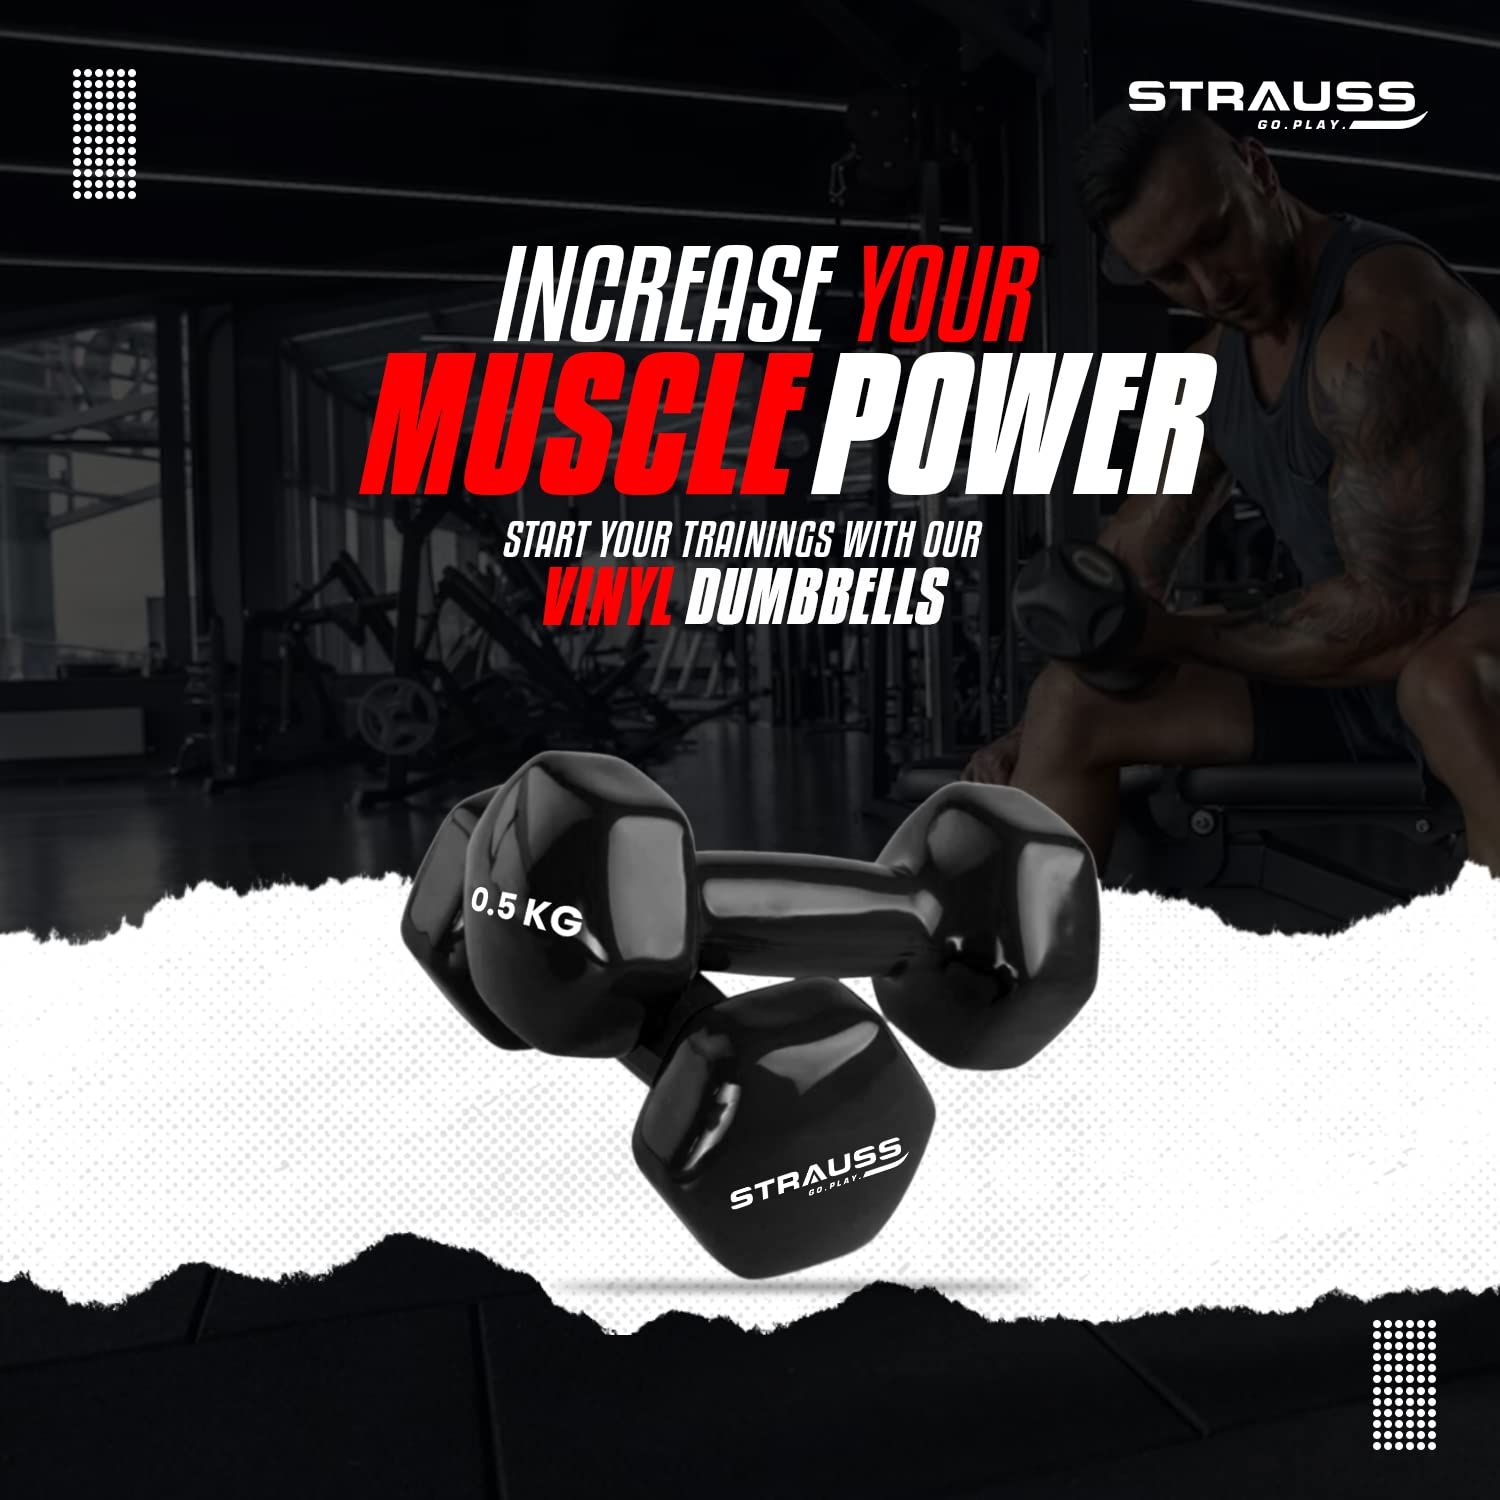 Strauss Premium Vinyl Dumbbells Weight for Men & Women | 0.5 Kg (Each) | 1 Kg (Pair) | Ideal for Home Workout, Yoga, Pilates, Gym Exercises | Non-Slip, Easy to Hold, Scratch Resistant (Black)